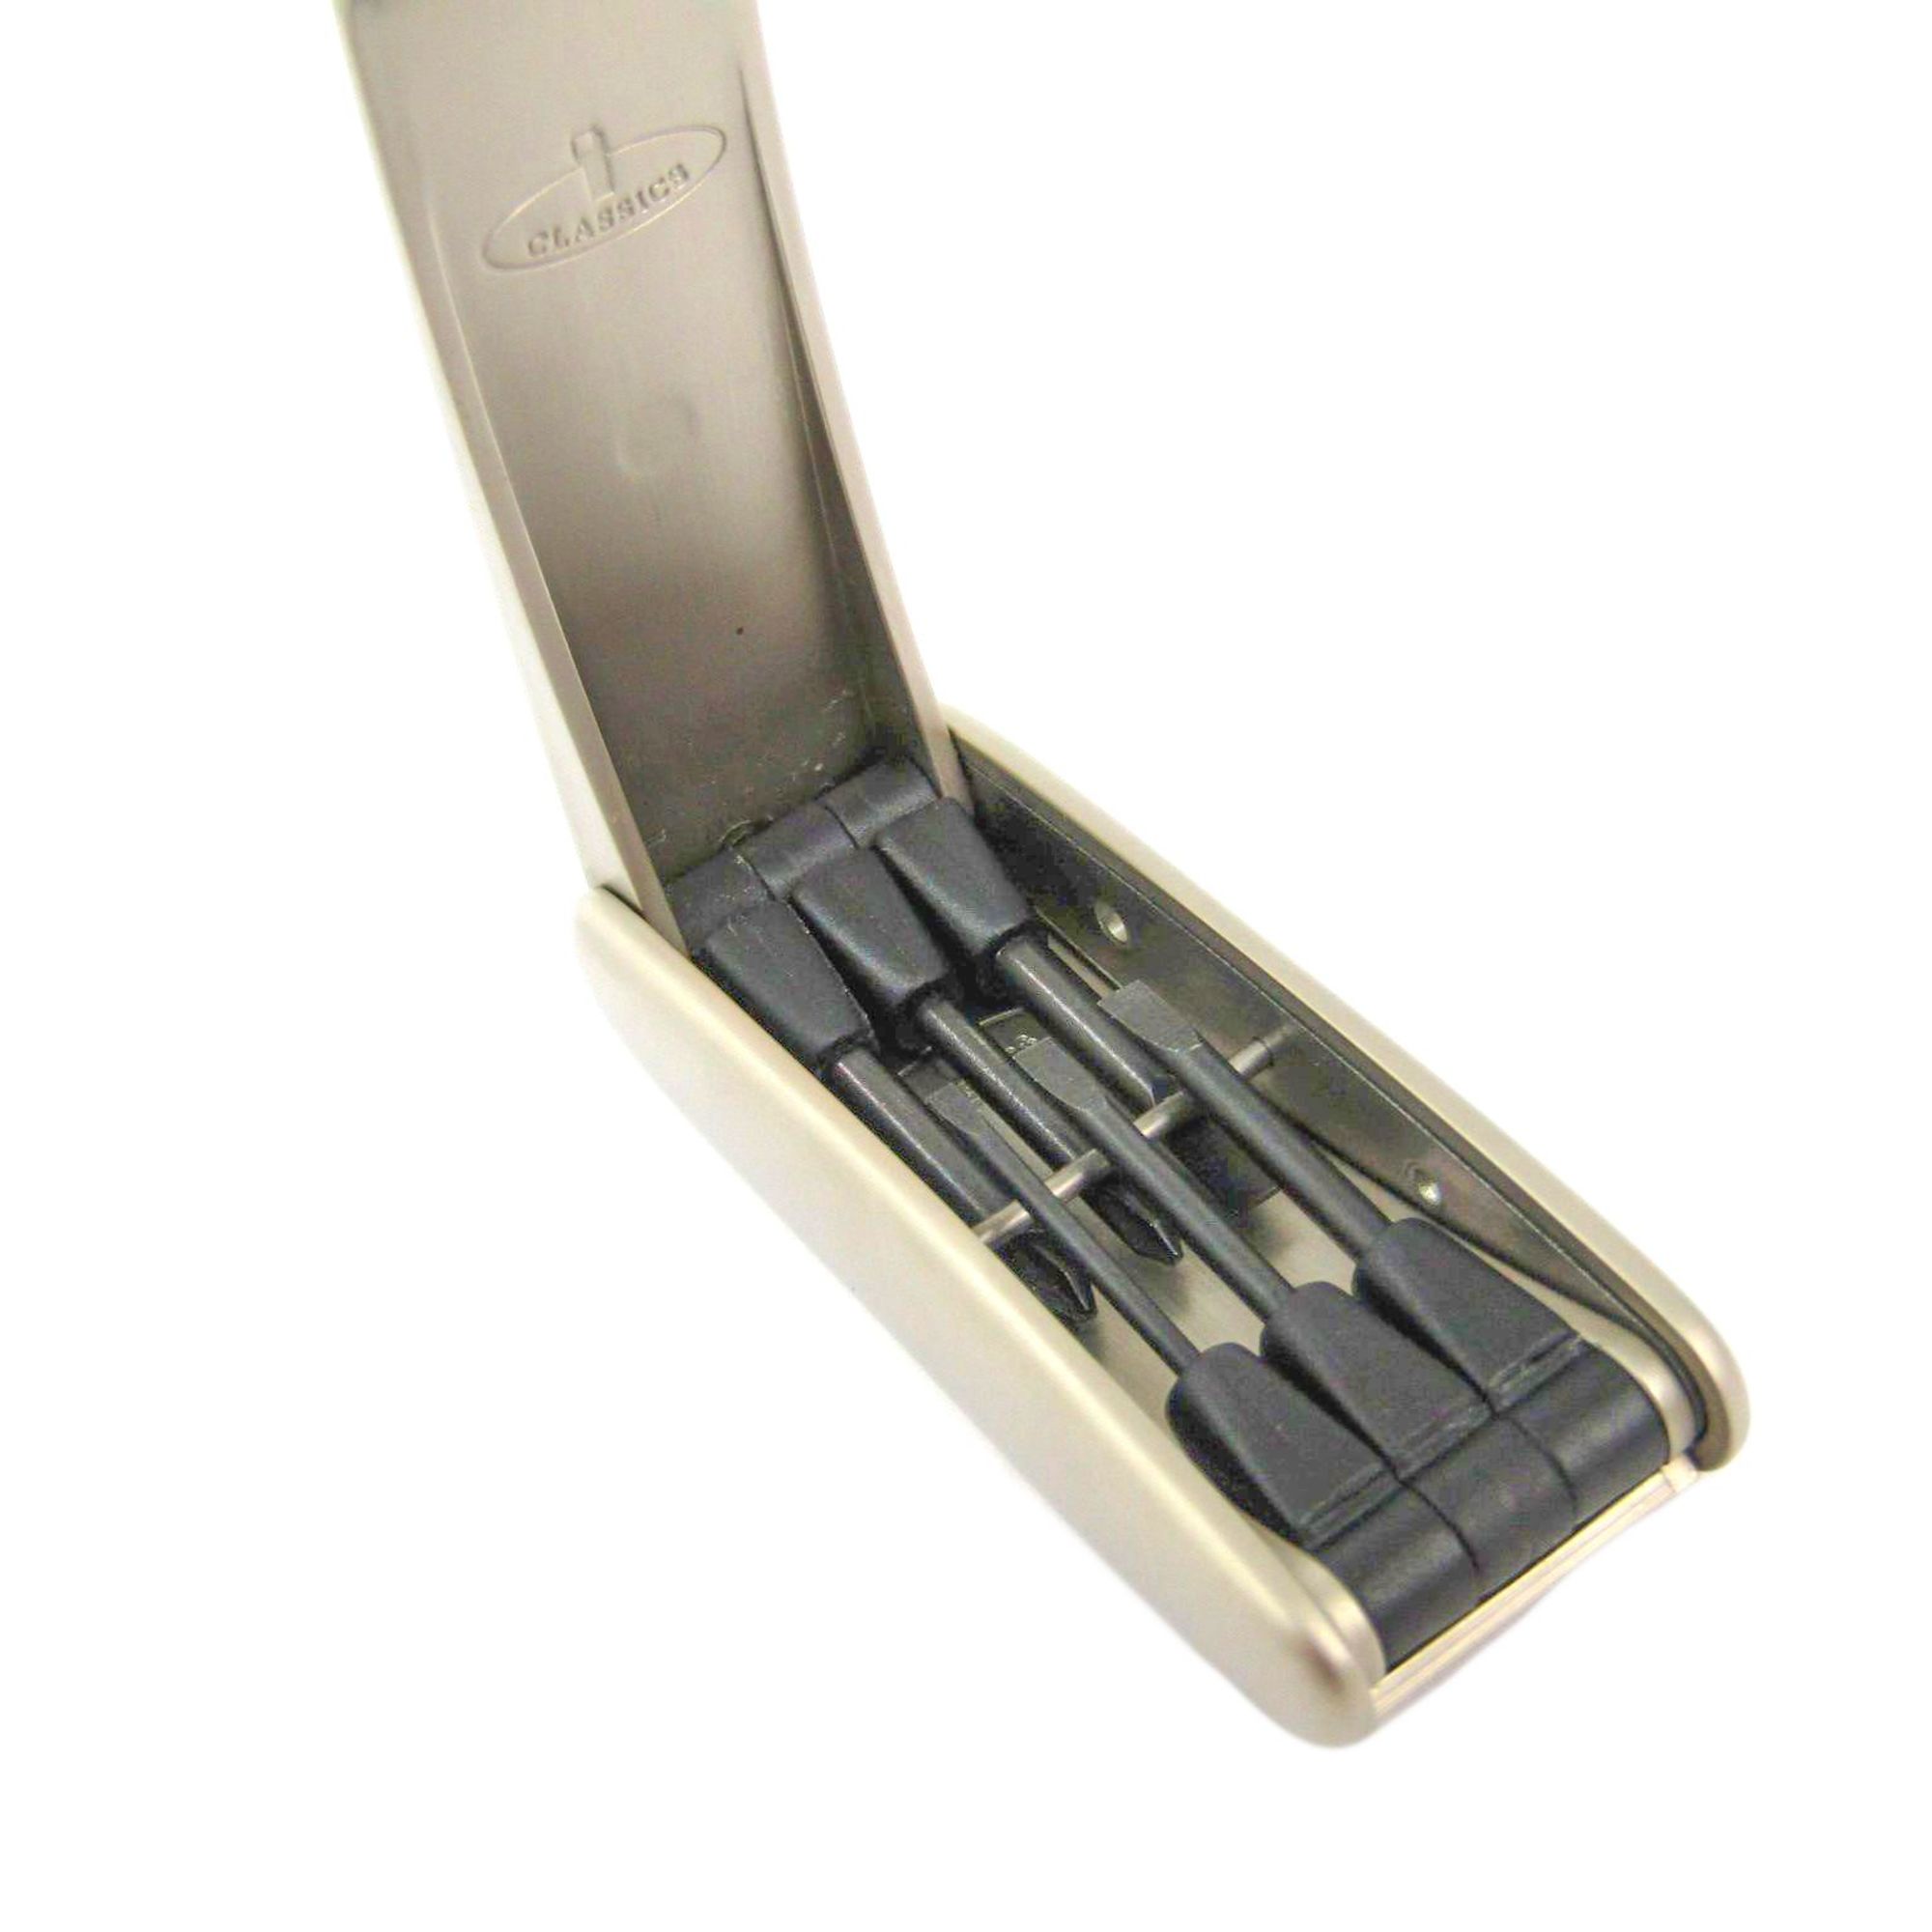 HERMES Portable Screwdrivers Set CLASSICS Stainless/Metal Silver